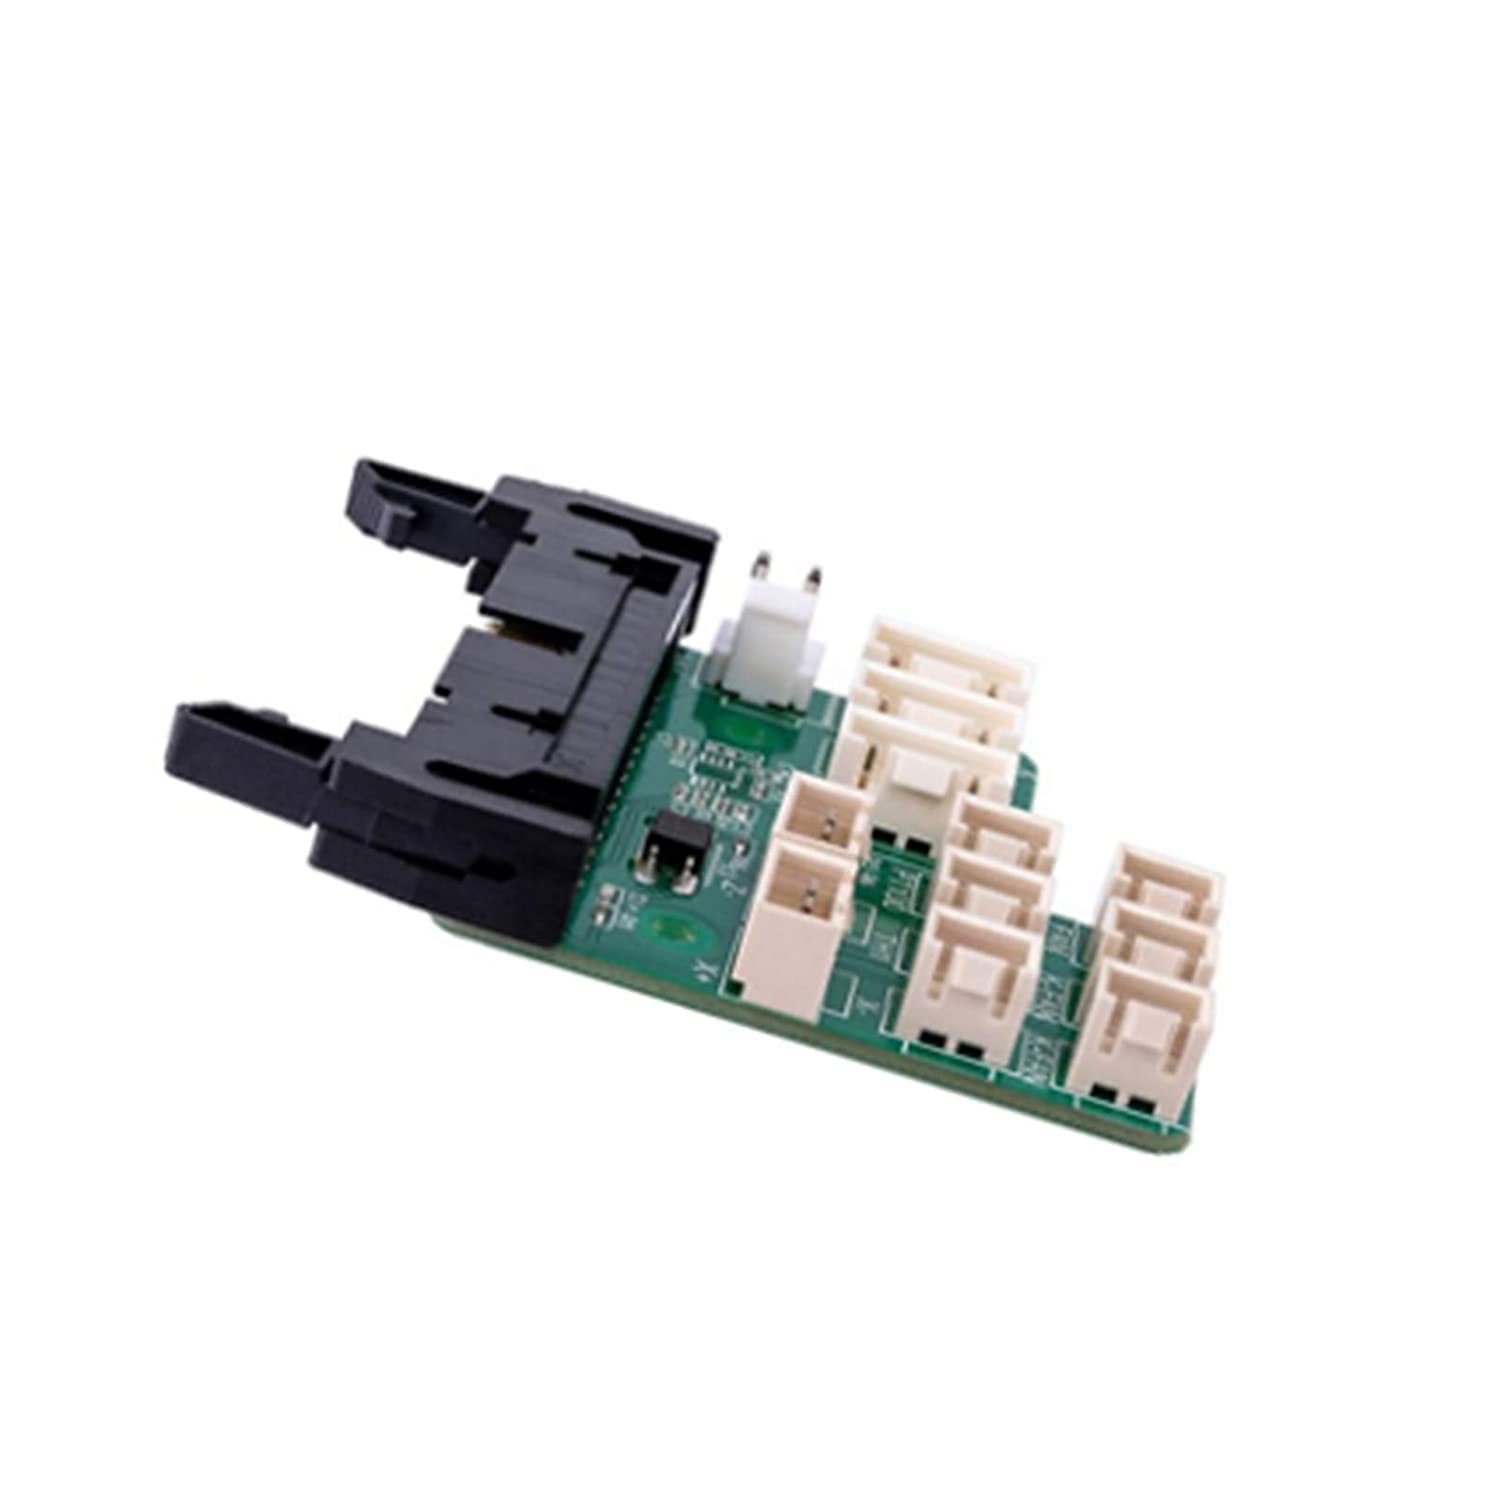 Breakout Board Adapter / Daughterboard for Creality 3D CR-10S Pro 3D Printer